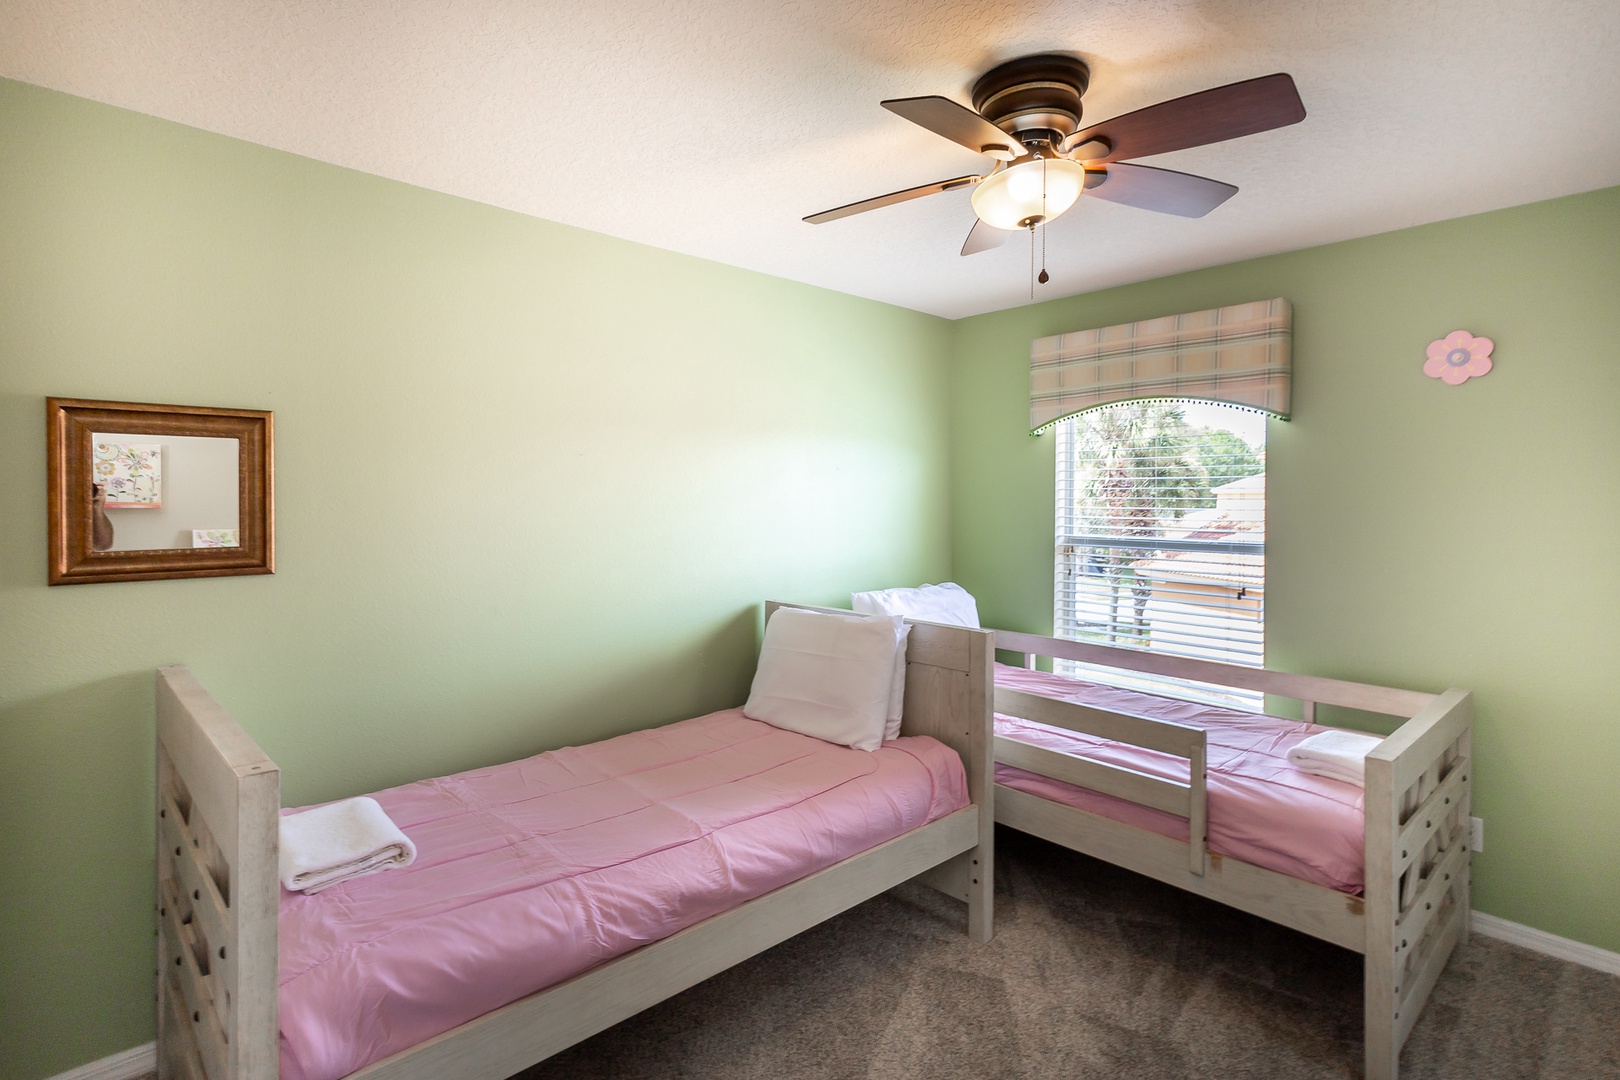 A 2nd twin bedroom offers a pair of twin beds, ceiling fan, & TV